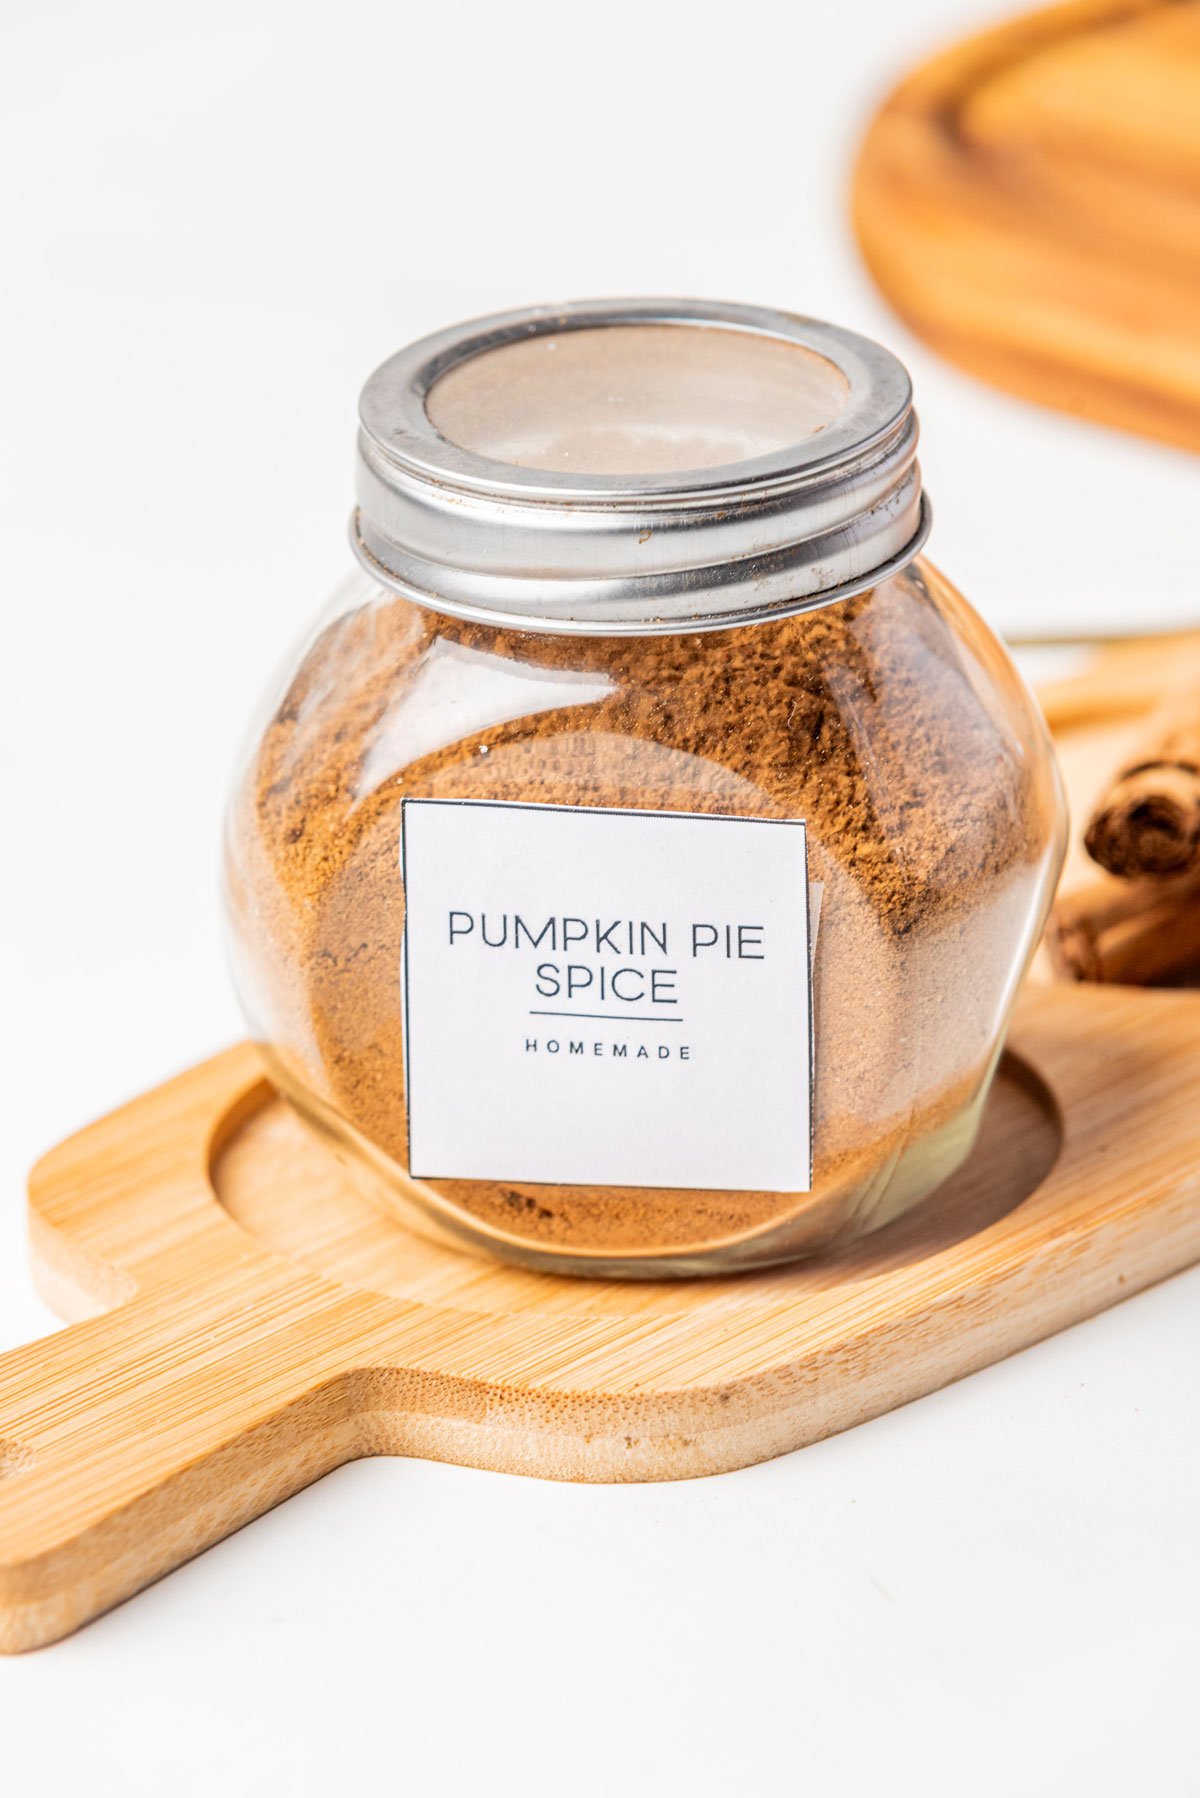 Homemade Pumpkin Pie Spice (Easy DIY Recipe) made and stored in a glass jar with a metal screw top lid and label